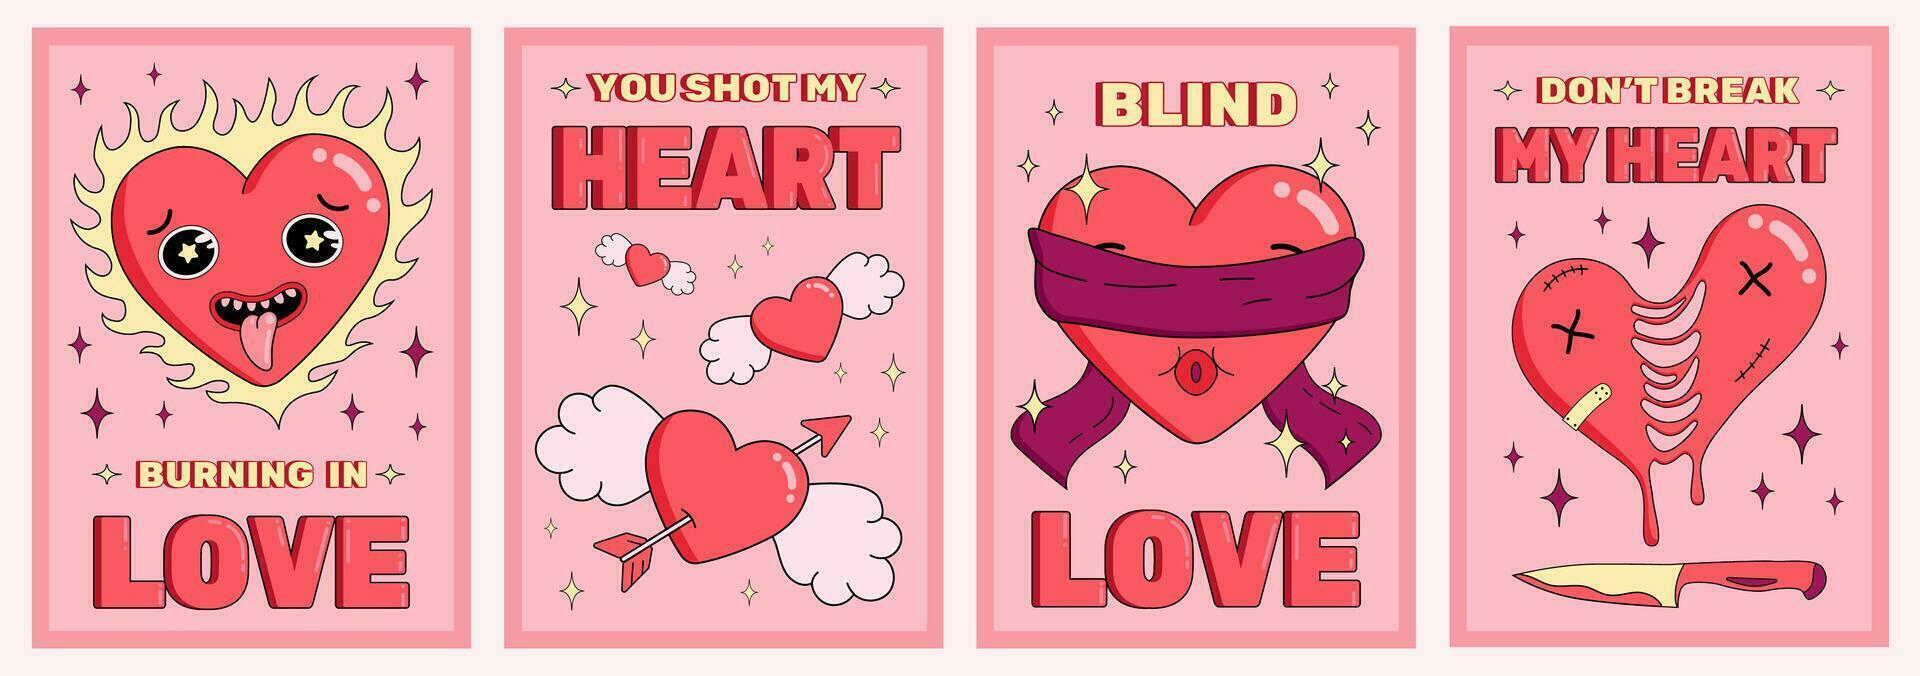 Set of Valentine's Day posters with cute groovy heart characters, symbols of love, vertical banners, gifts, postcards, vector illustration.